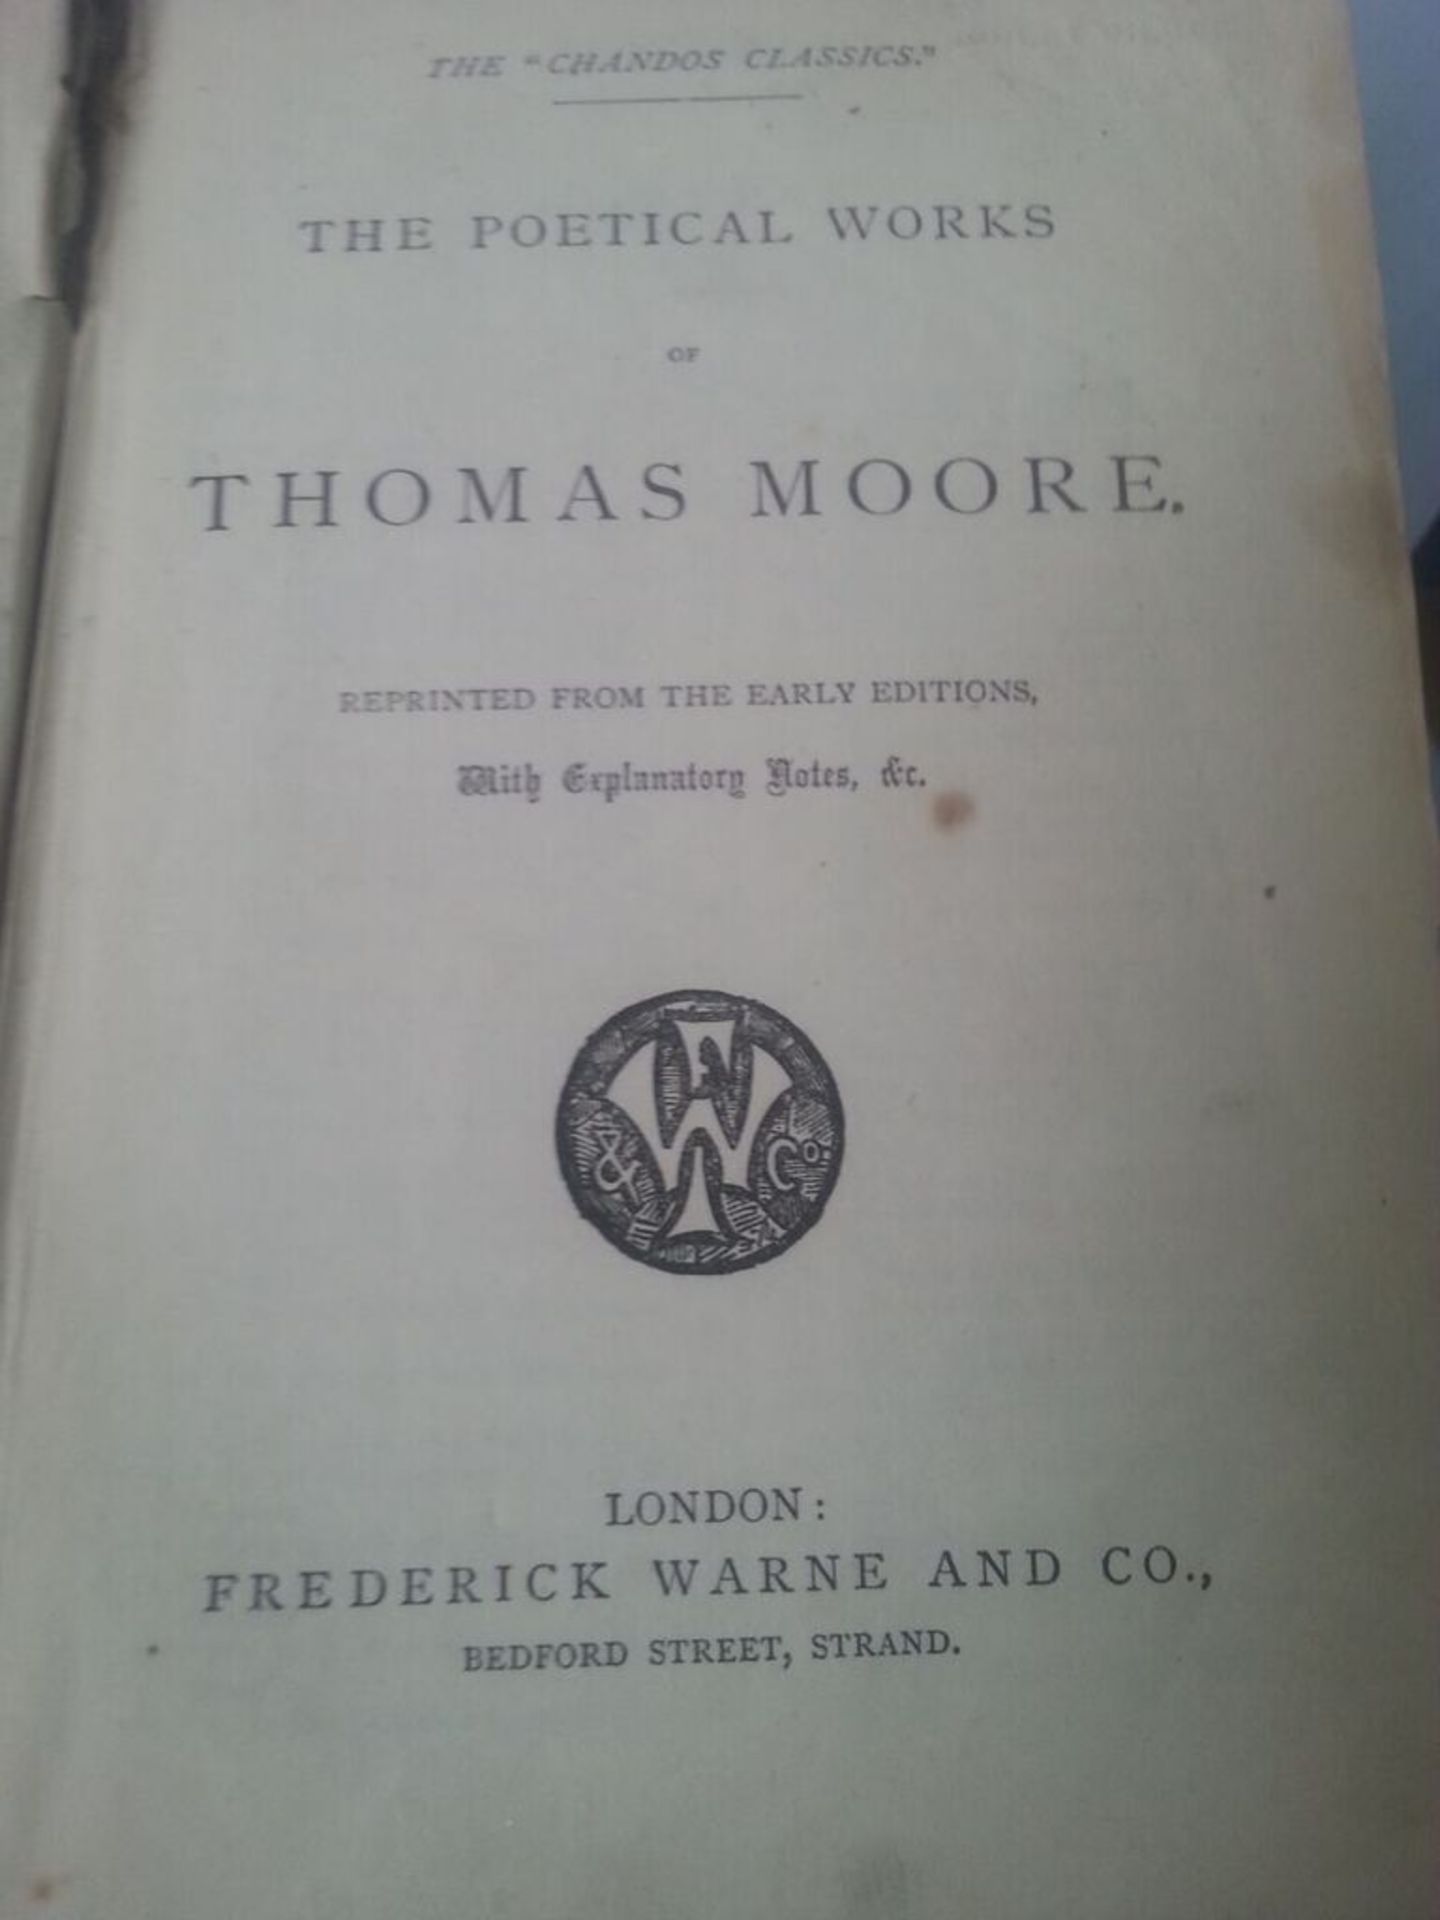 Antique book "The Poetical Works of Thomas Moore" The Chandos Classics London; Frederick Warne & Co